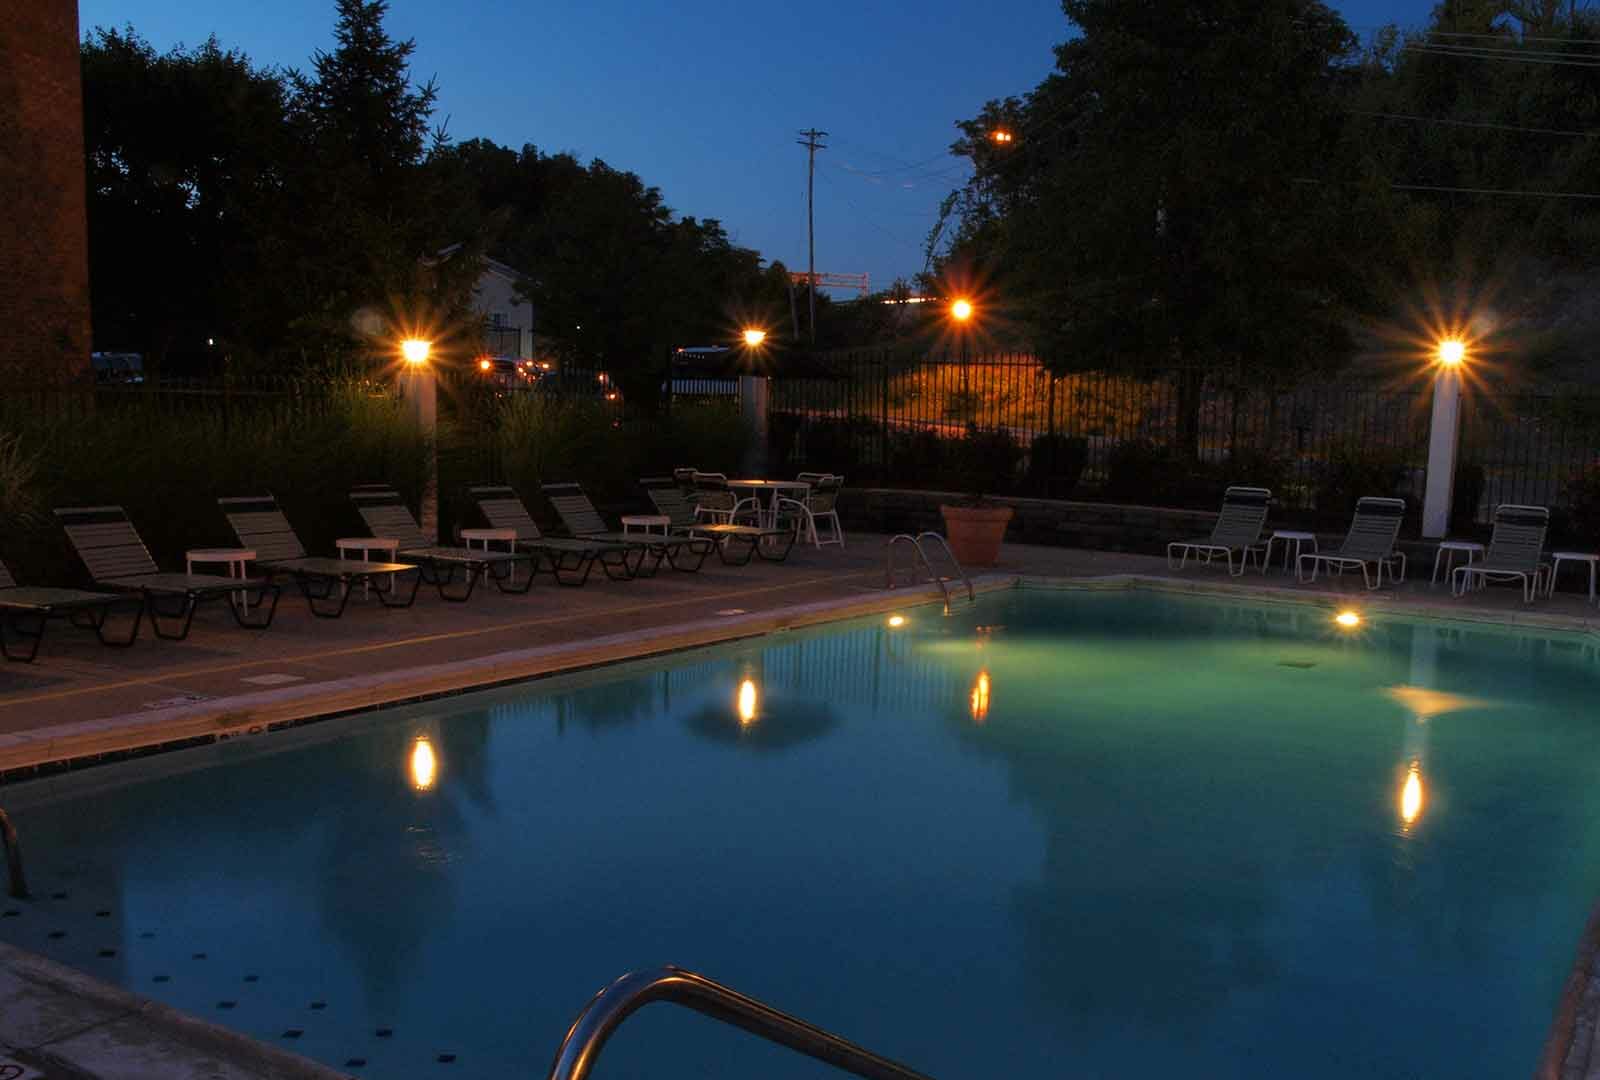 Outdoor pool with night lighting and lounge deck at Fox Chase South.